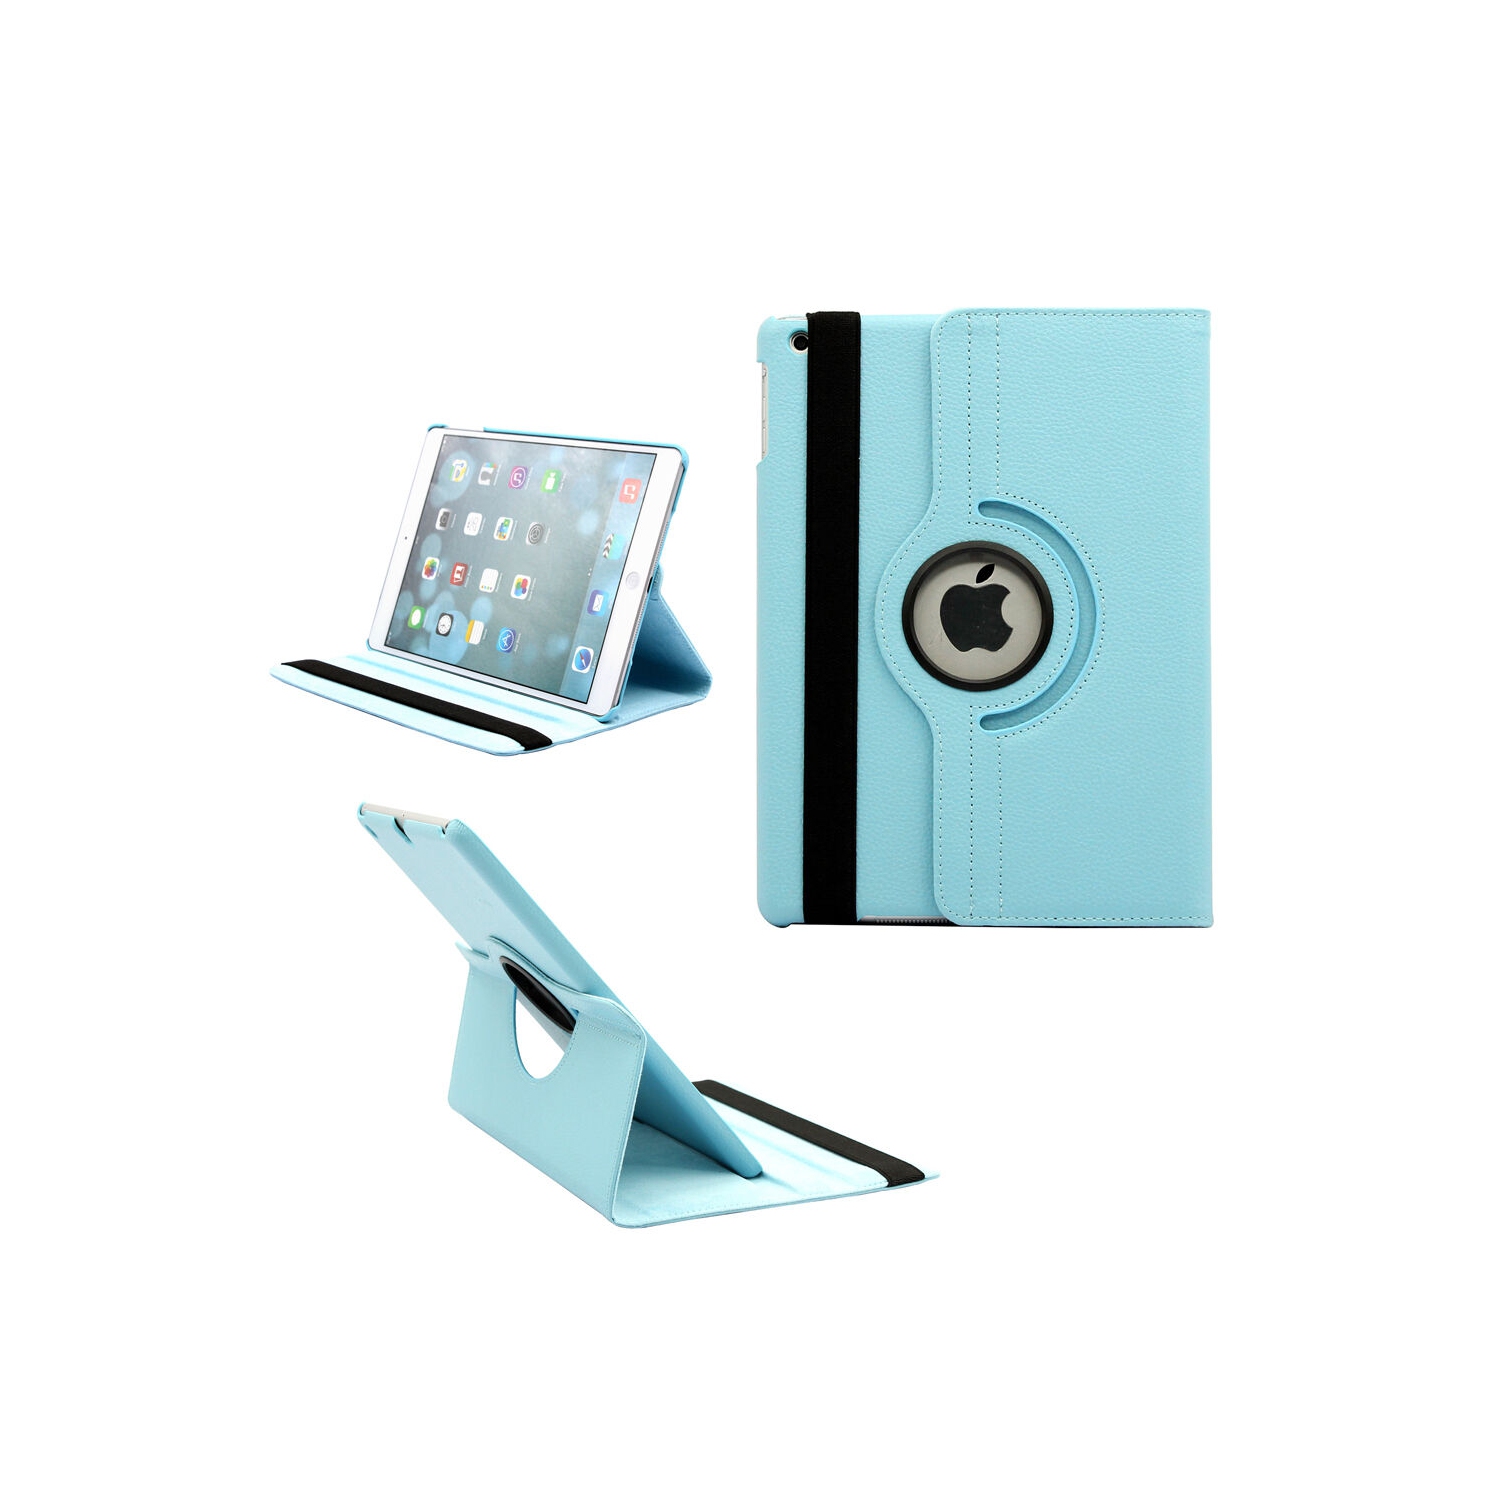 【CSmart】 360 Rotating PU Leather Stand Case Smart Cover for iPad Air 1 2 1st 2nd Gen, Light Blue